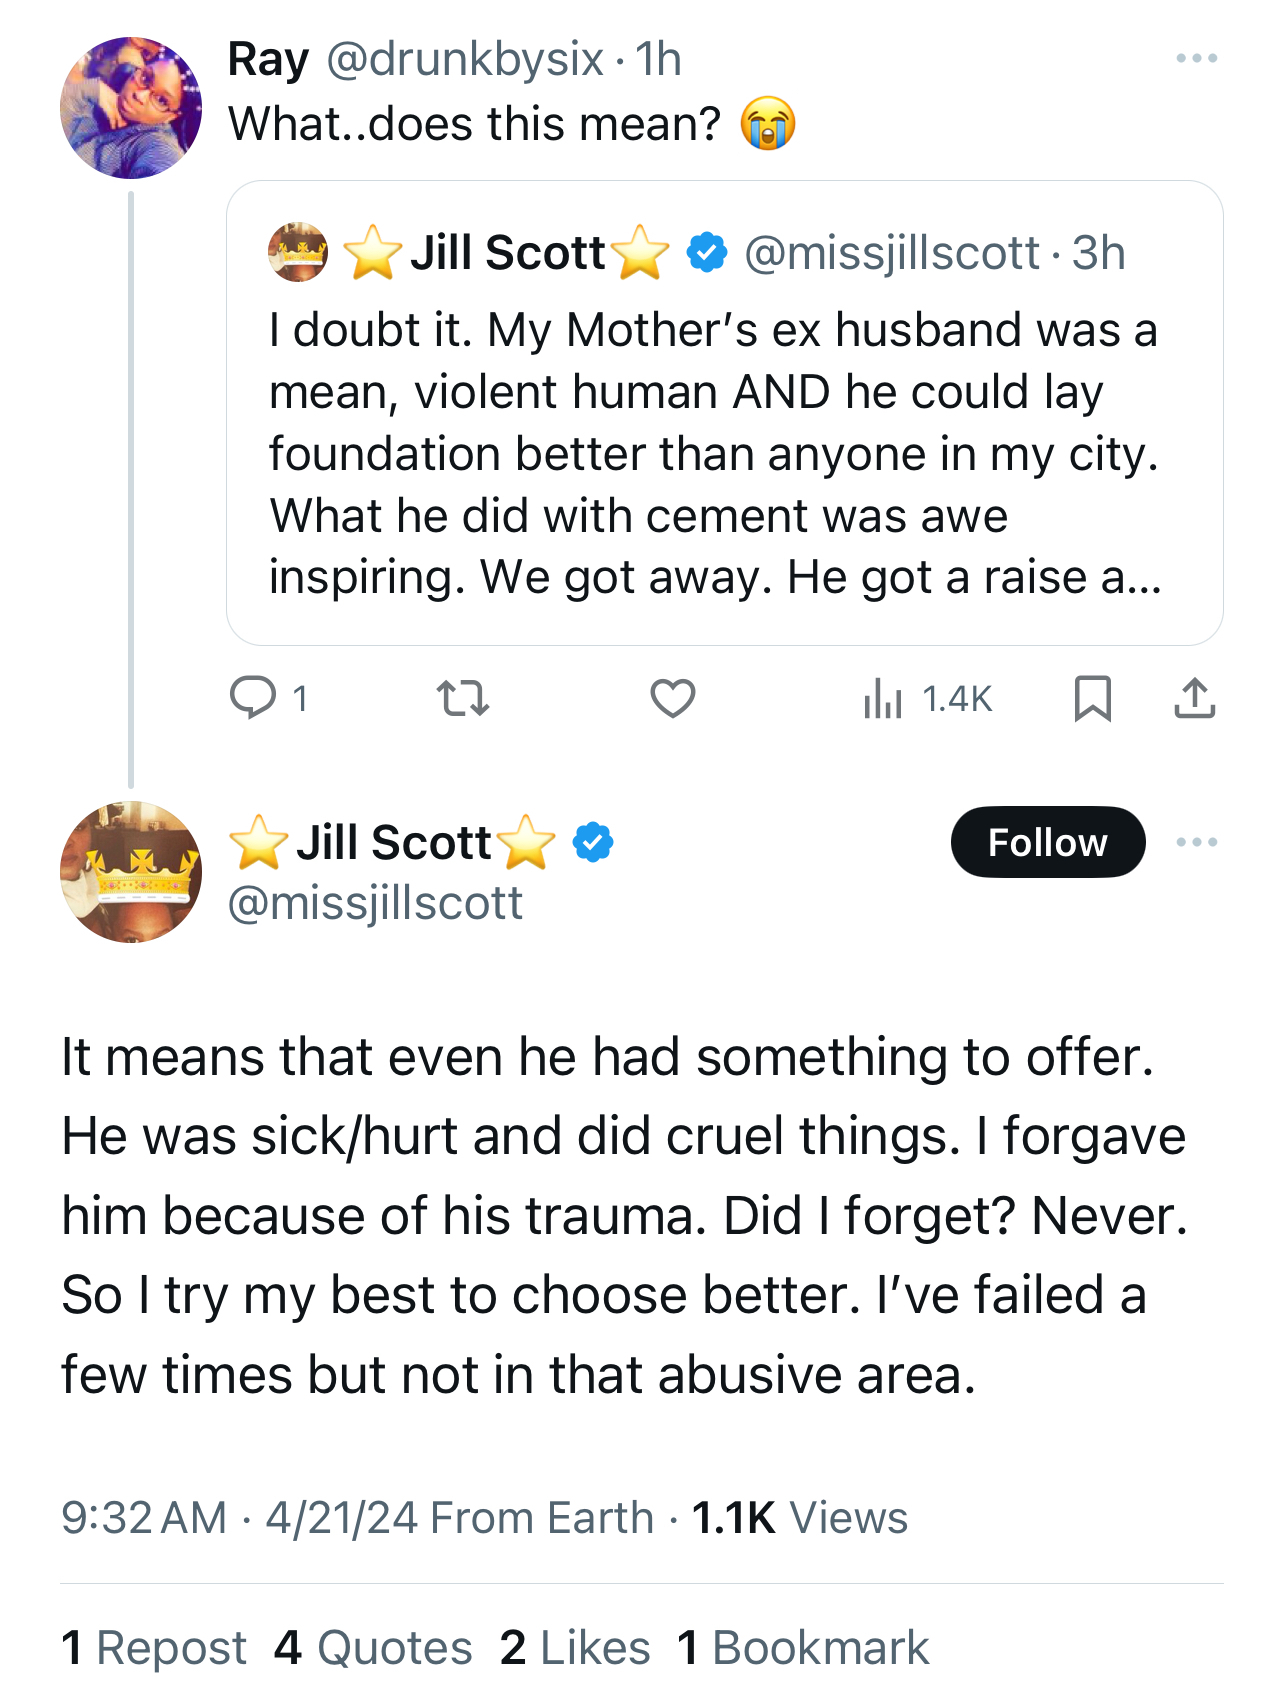 Two tweets by @missjillscott discussing personal sentiments about forgiveness and past trauma